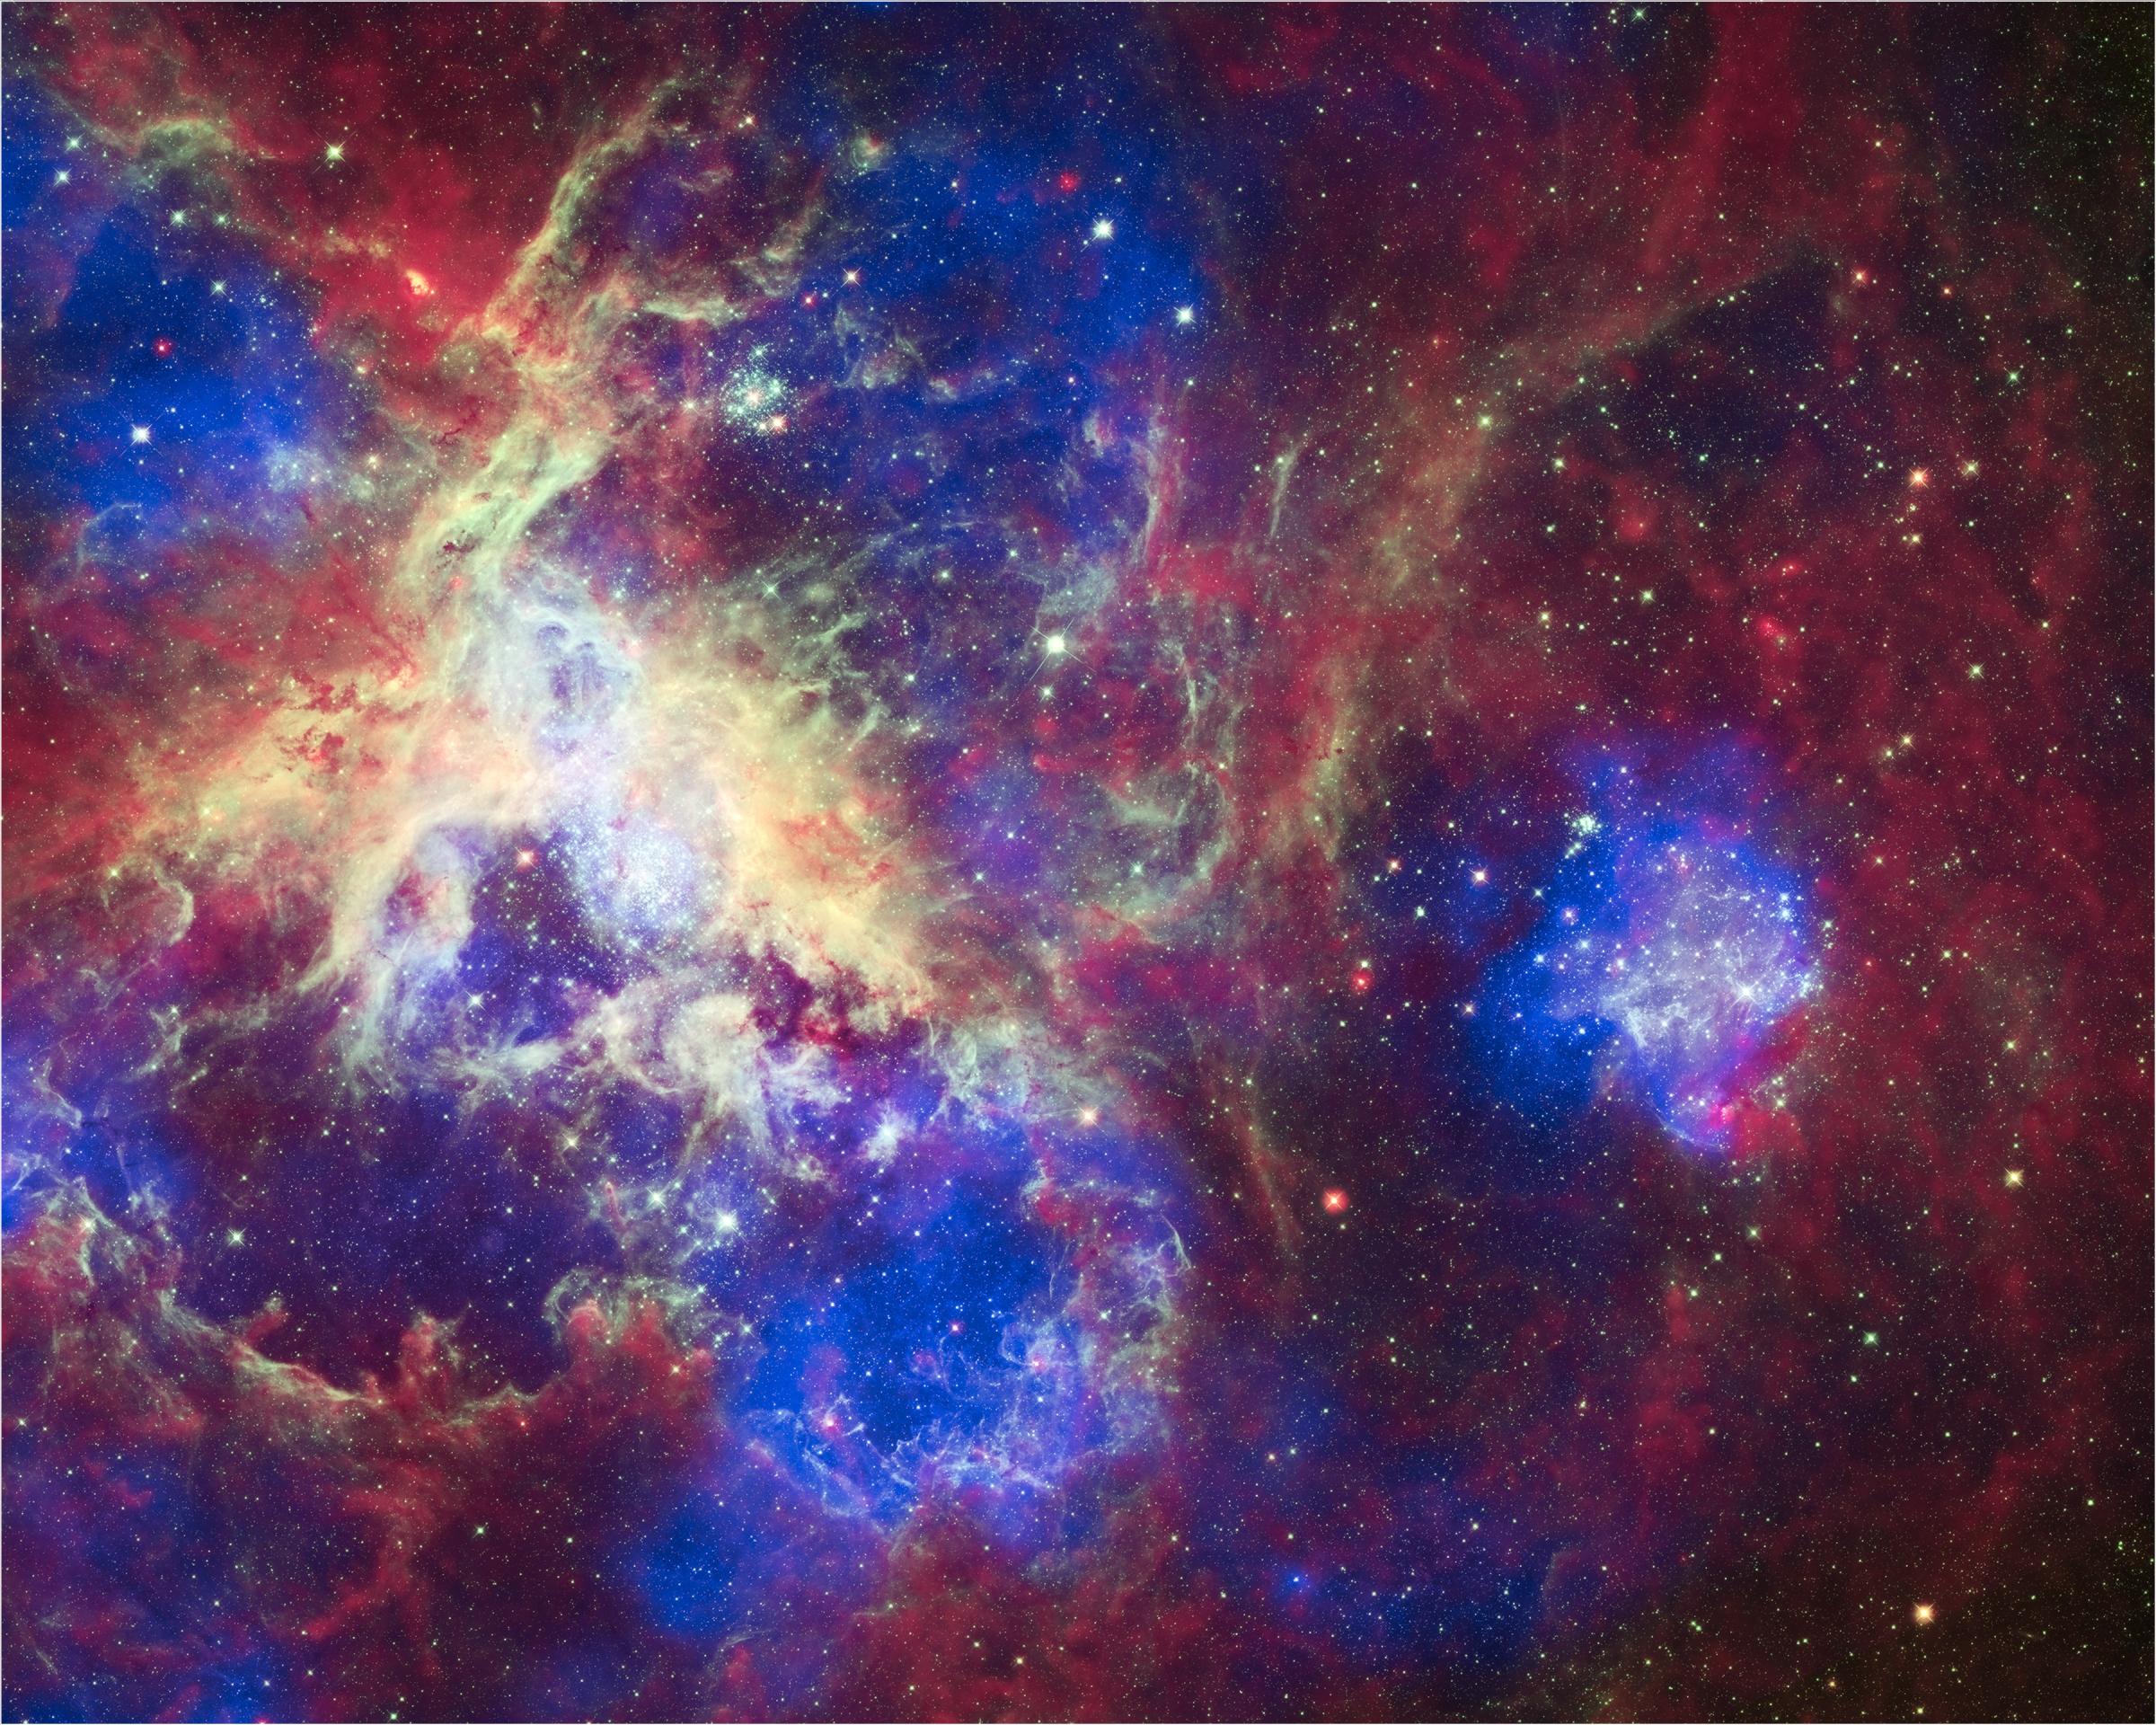 This composite of 30 photos of theTarantula Nebula, contains data from Chandra (blue), Hubble (green), and Spitzer (red).  Located in the Large Magellanic Cloud, the Tarantula Nebula is one of the largest star-forming regions close to the Milky Way.